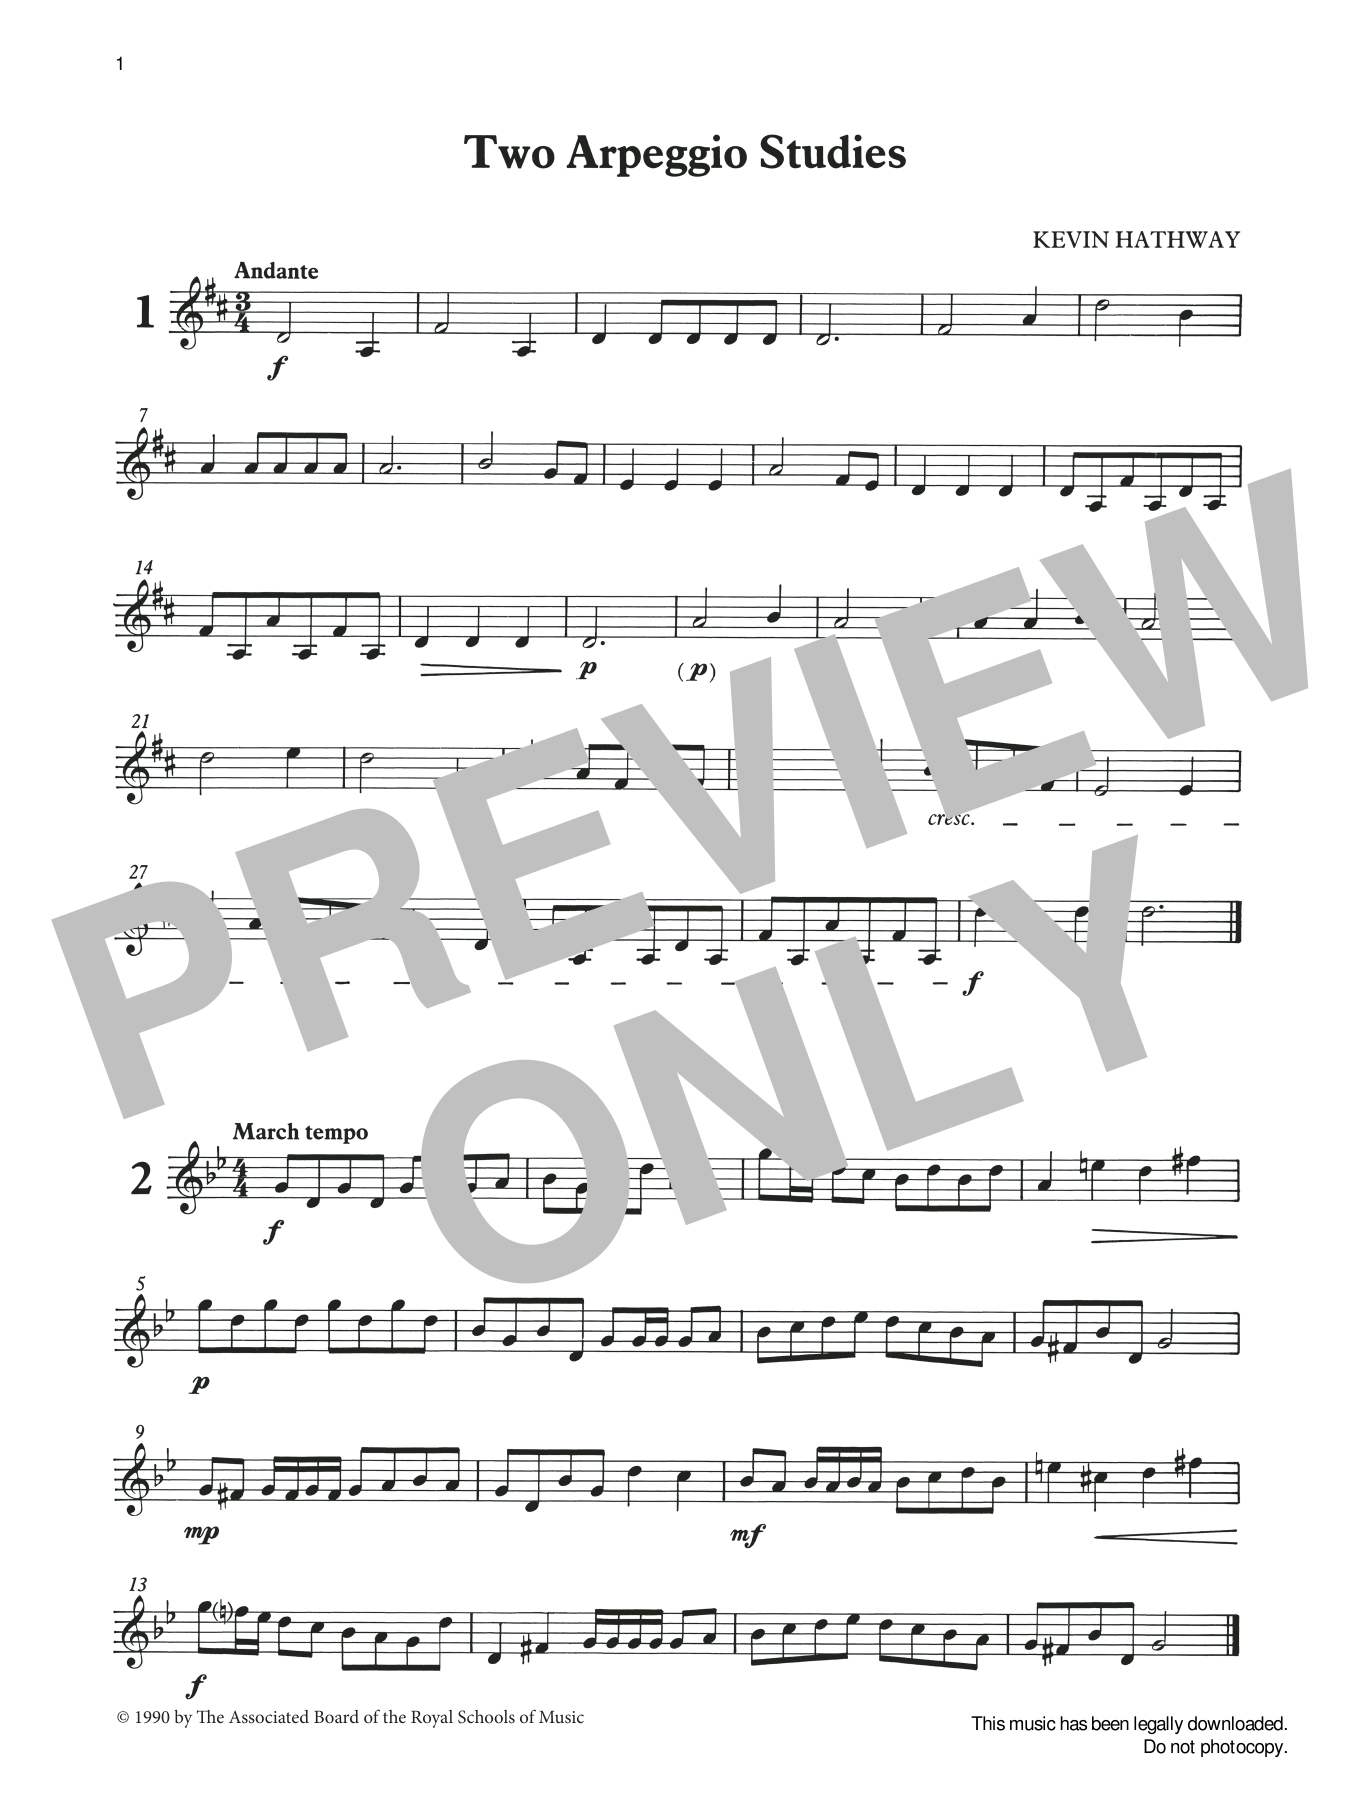 Download Ian Wright and Kevin Hathaway Two Arpeggio Studies from Graded Music Sheet Music